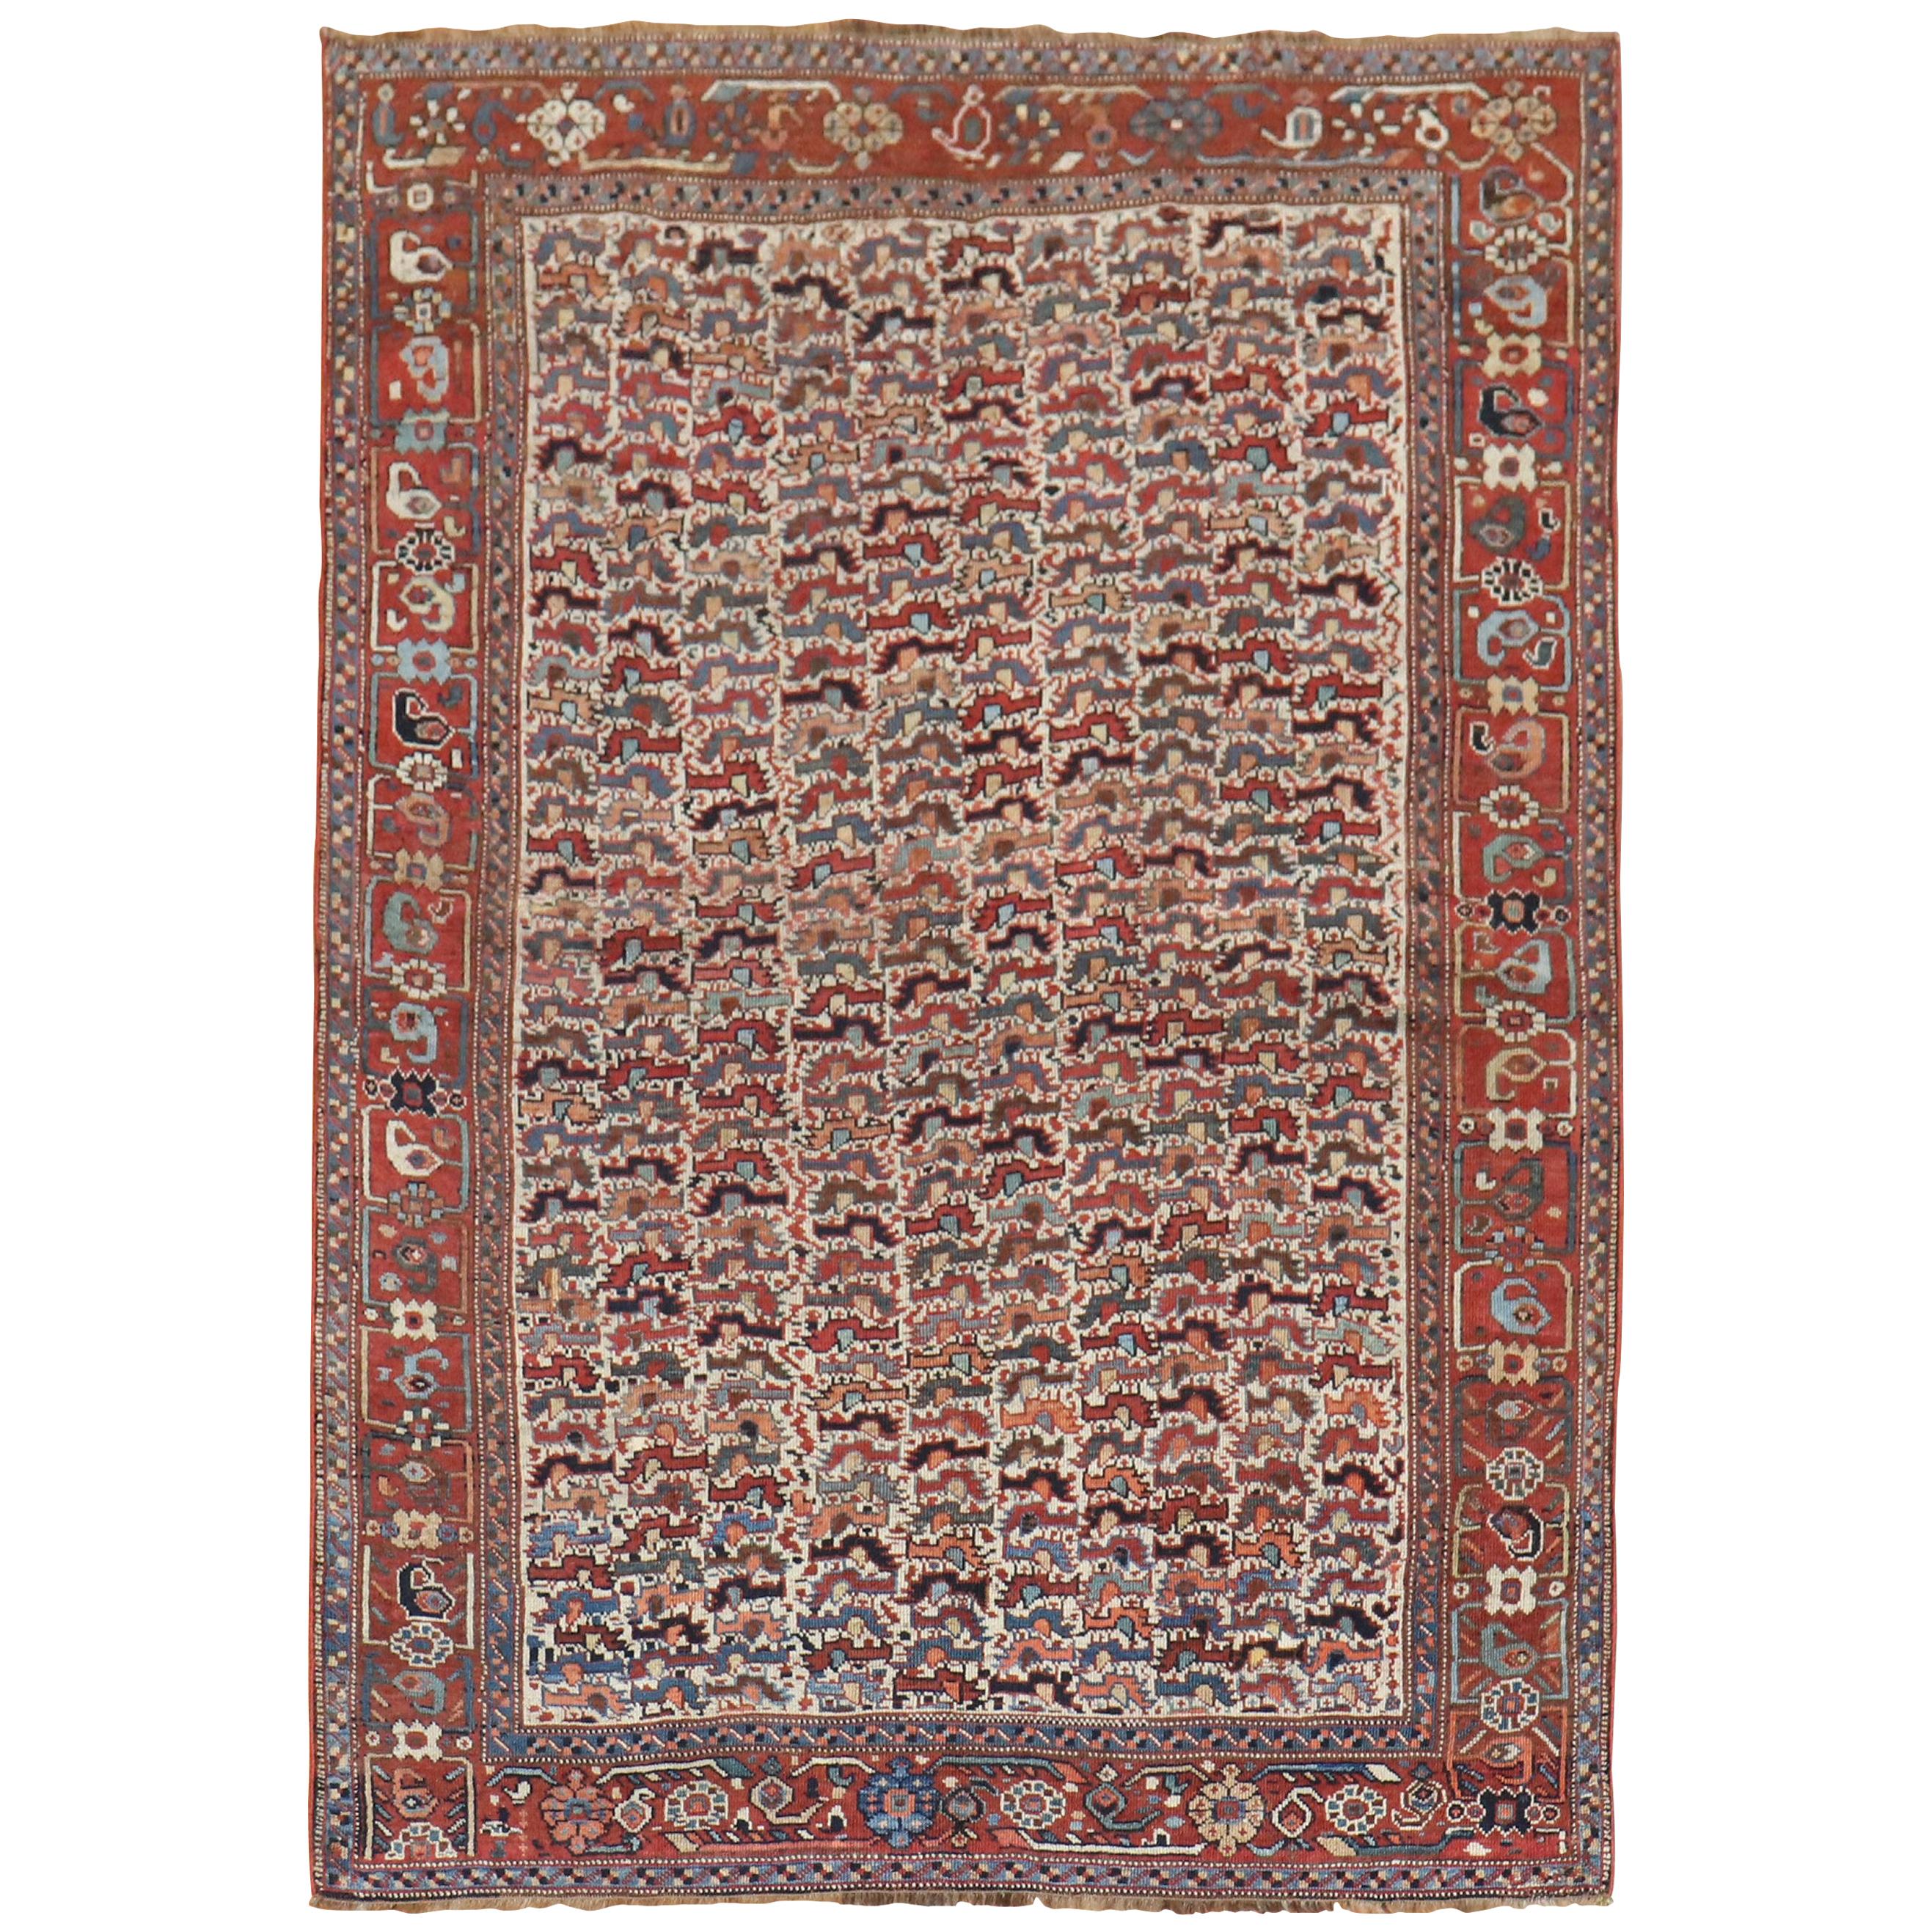 Tribal Chicken Motif Rustic Persian Afshar Accent Rug, Early 20th Century For Sale